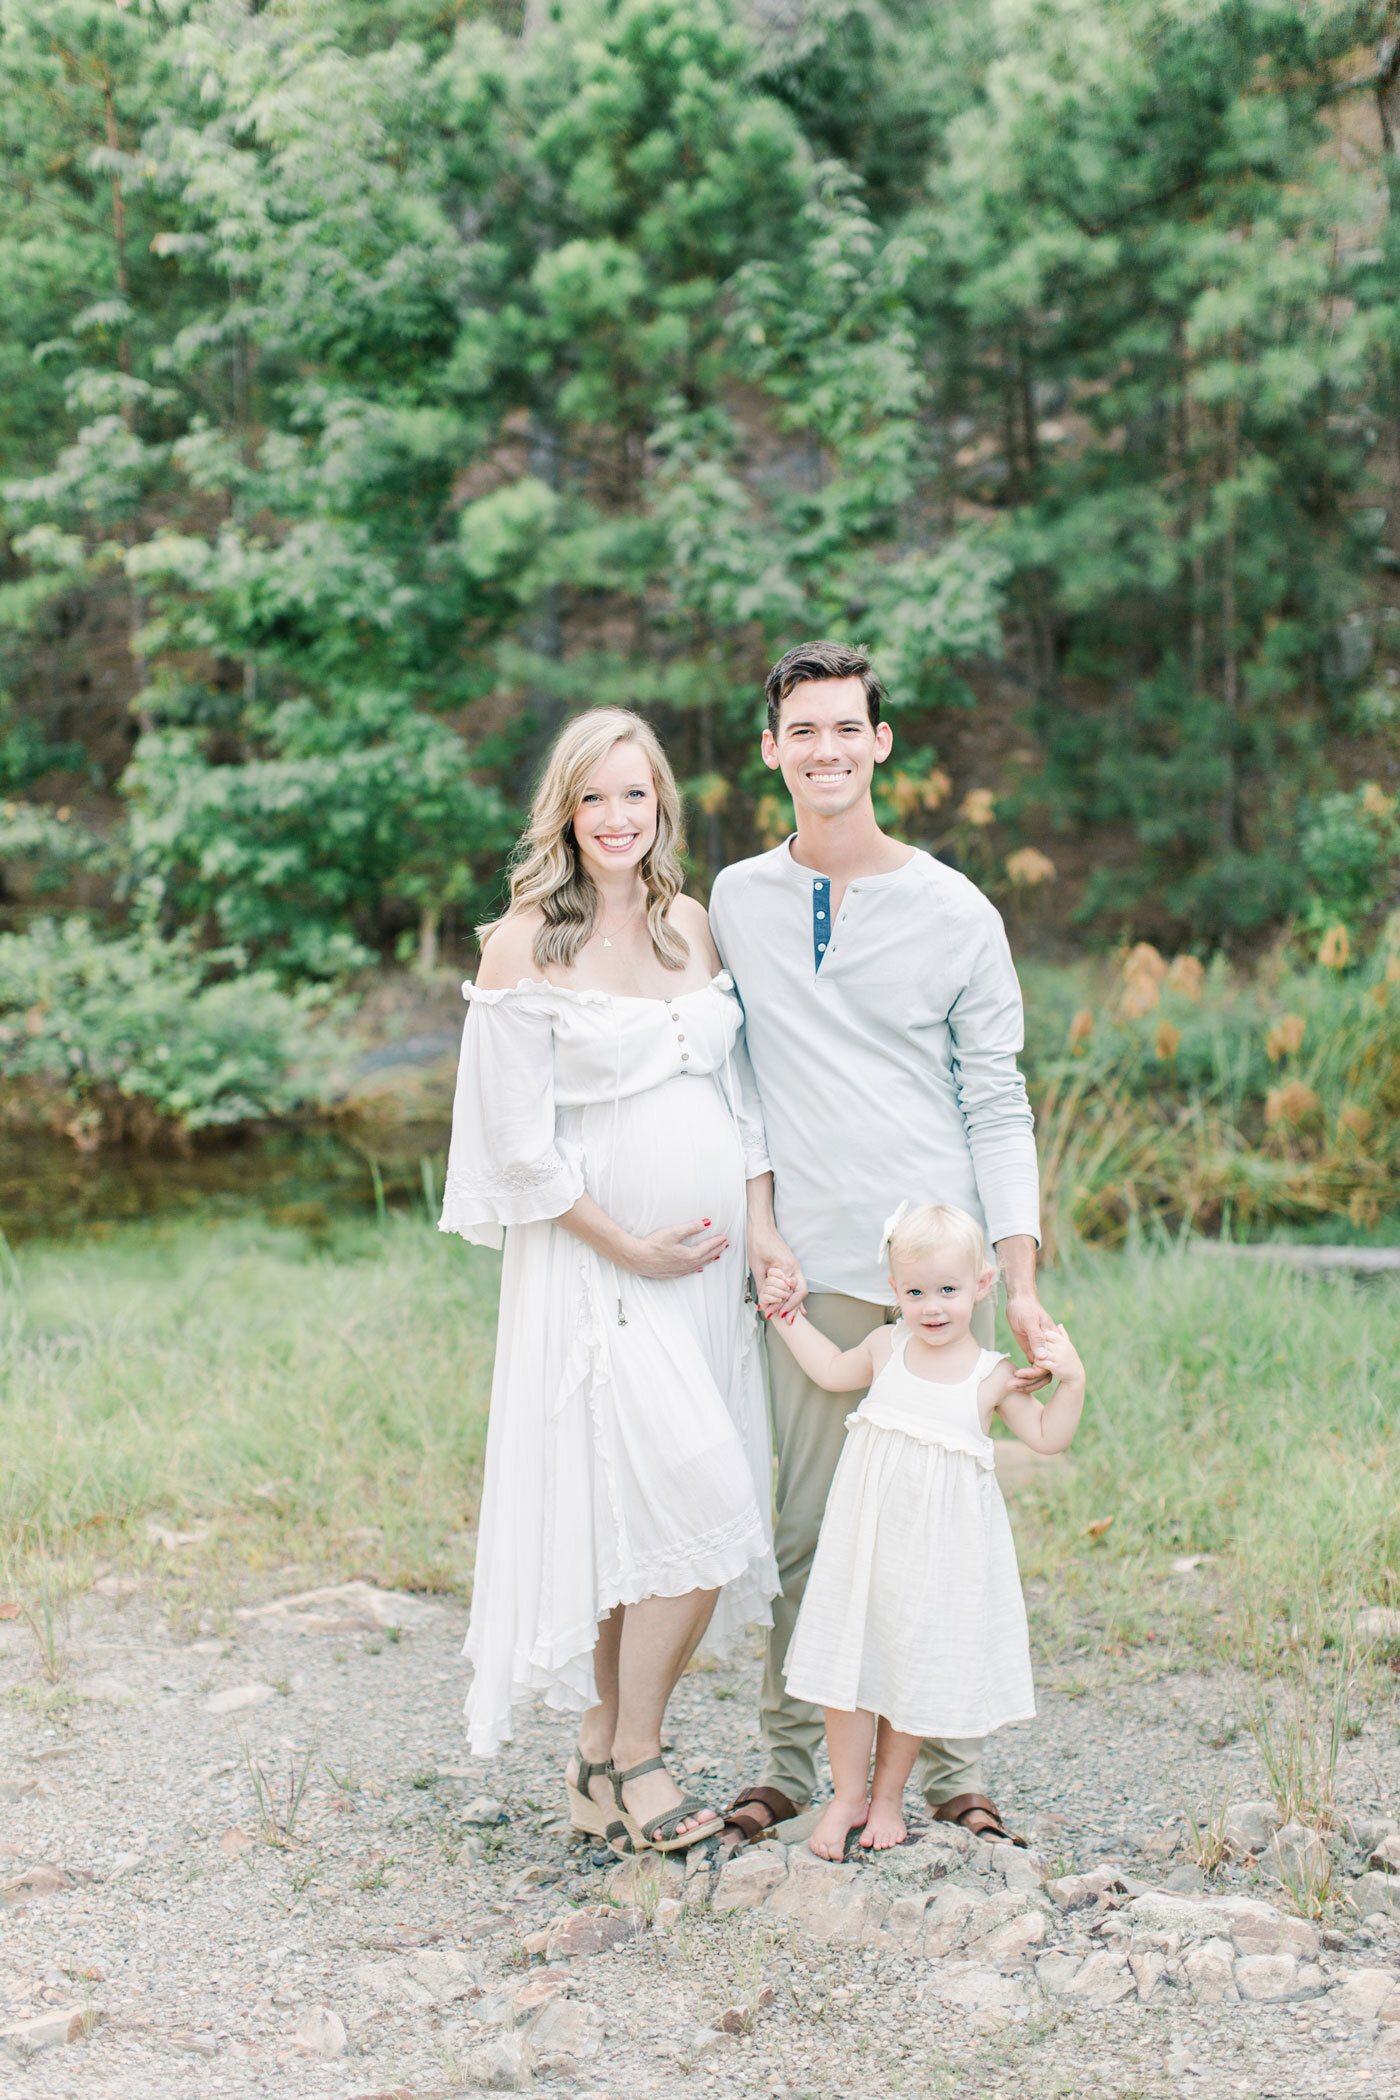 Outdoor Arkansas Maternity Session with Siblings